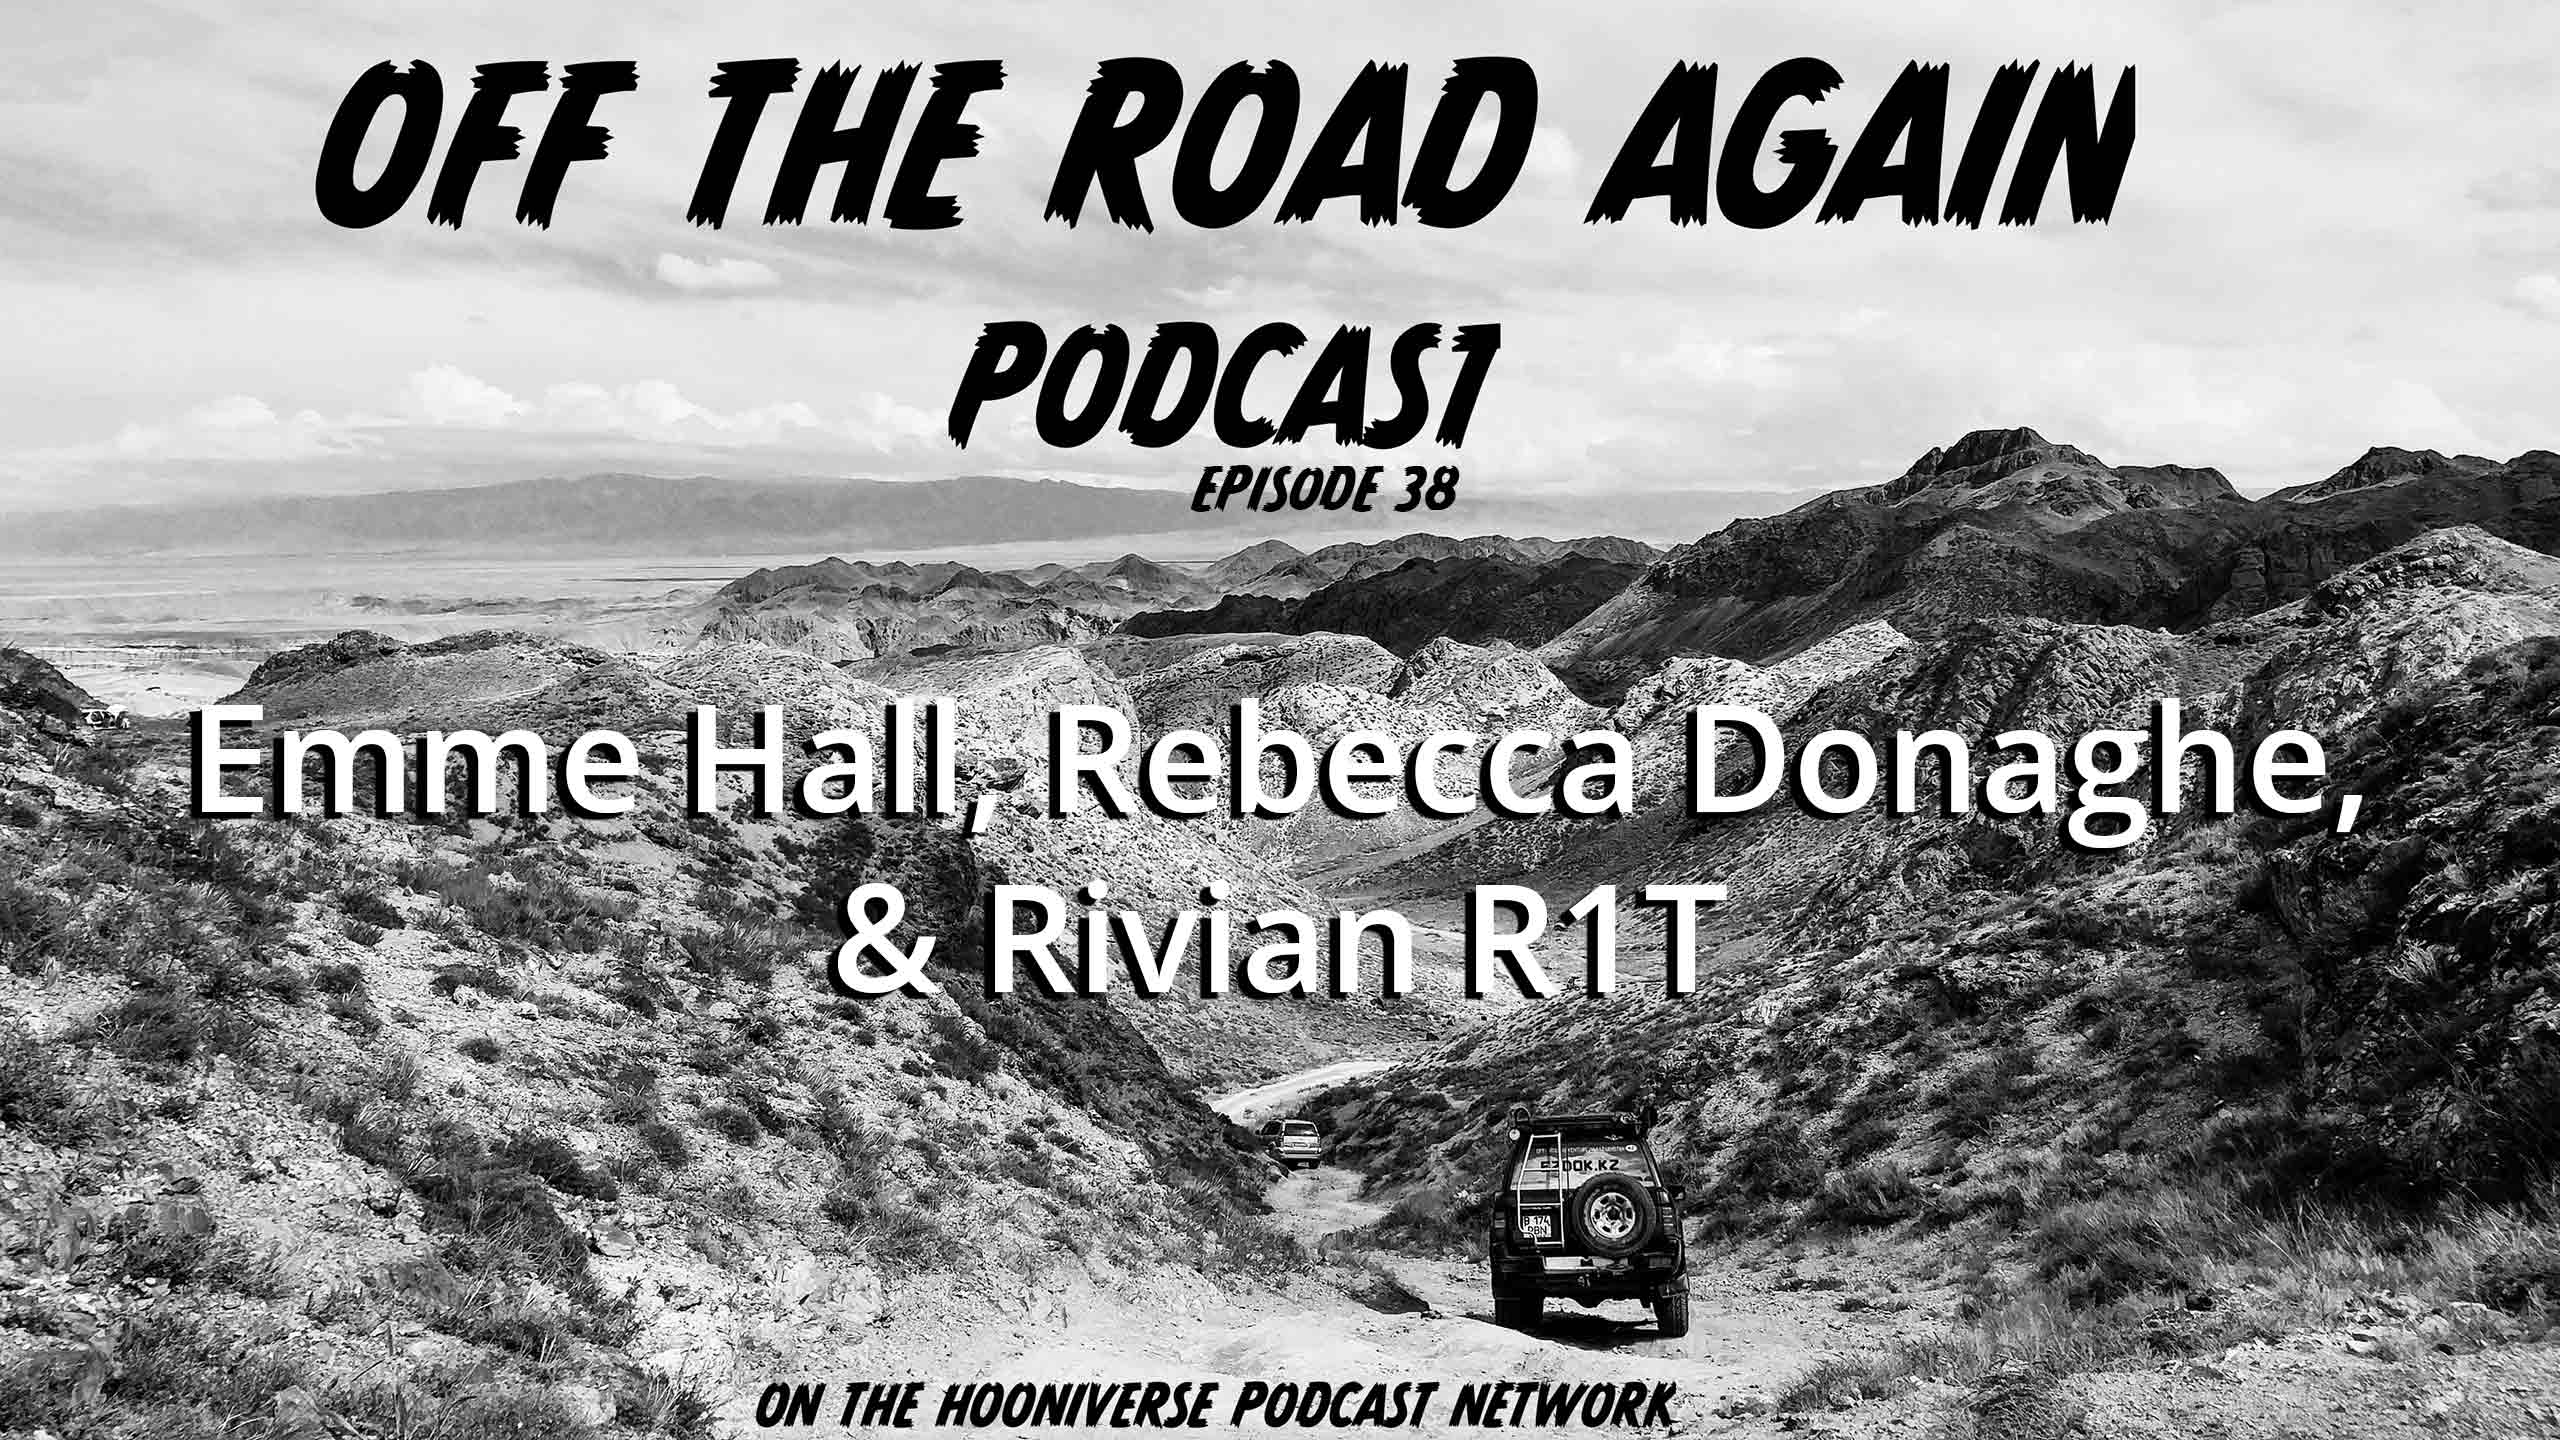 Emme-Hall-Rebecca-Donaghe-Rivian-R1T-Off-The-Road-Again-Podcast-Episode-38